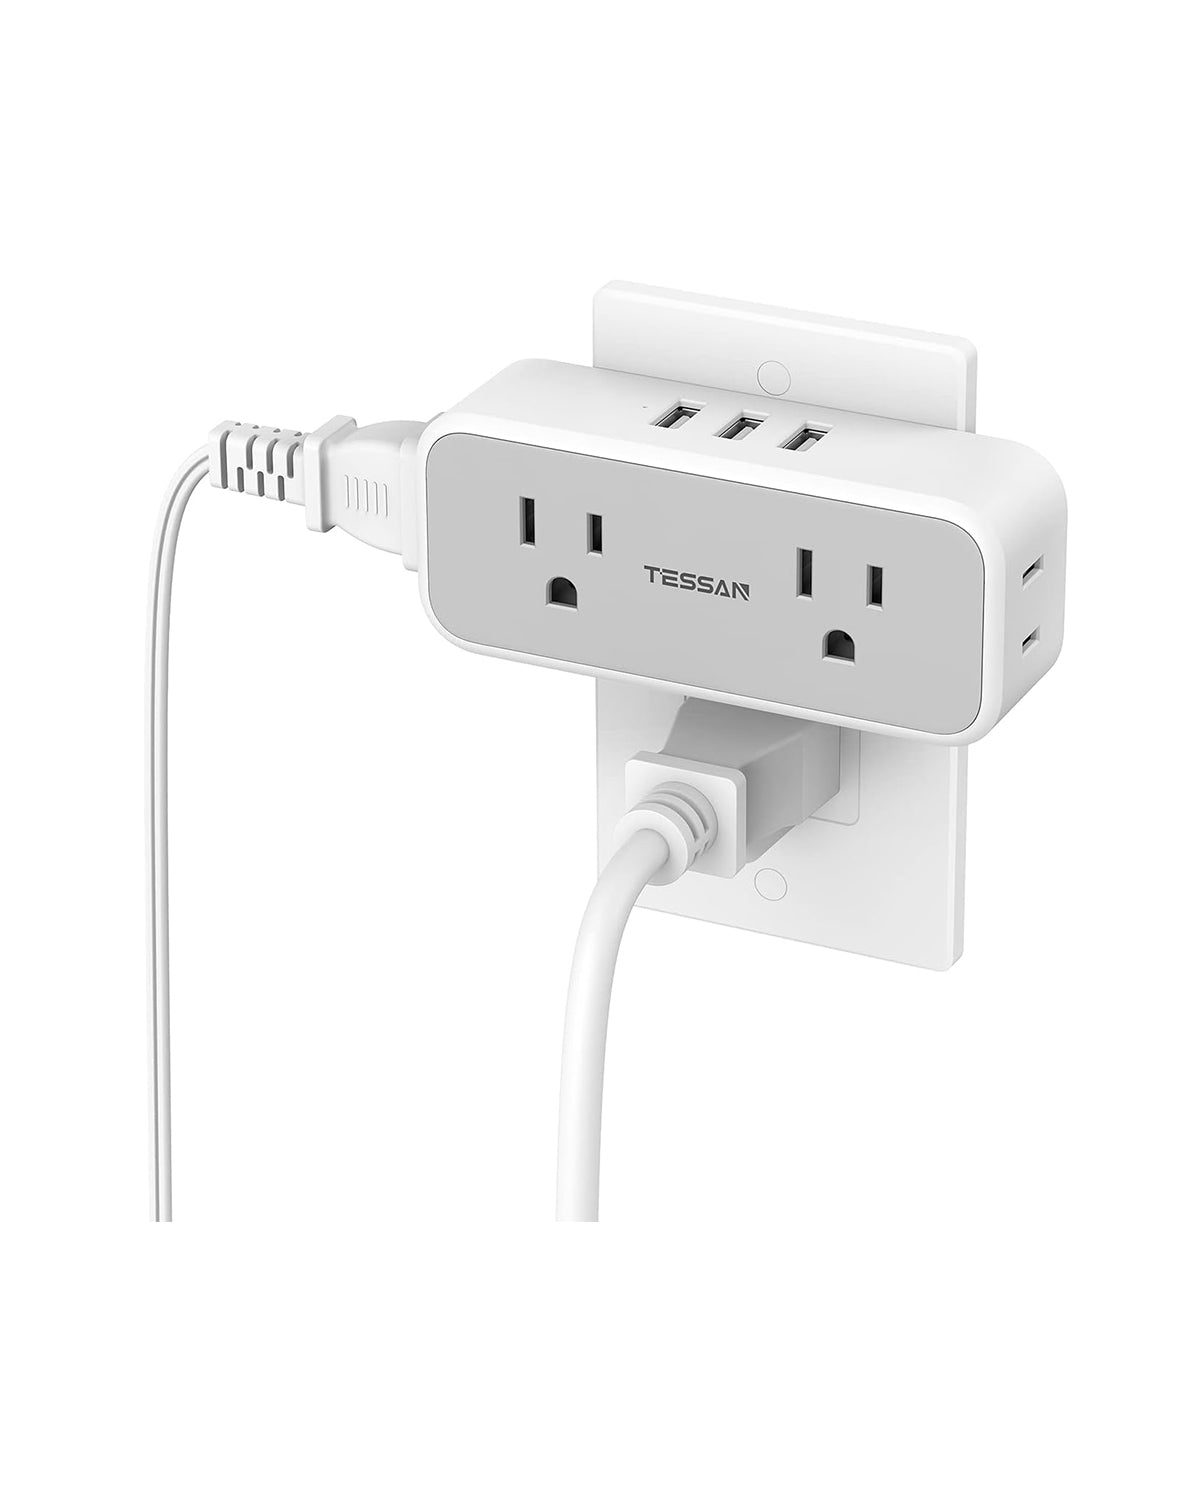 TESSAN Multi Plug Outlet Splitter with 4 Electrical Outlets 3 USB Ports, Surge Protector Outlet Extender